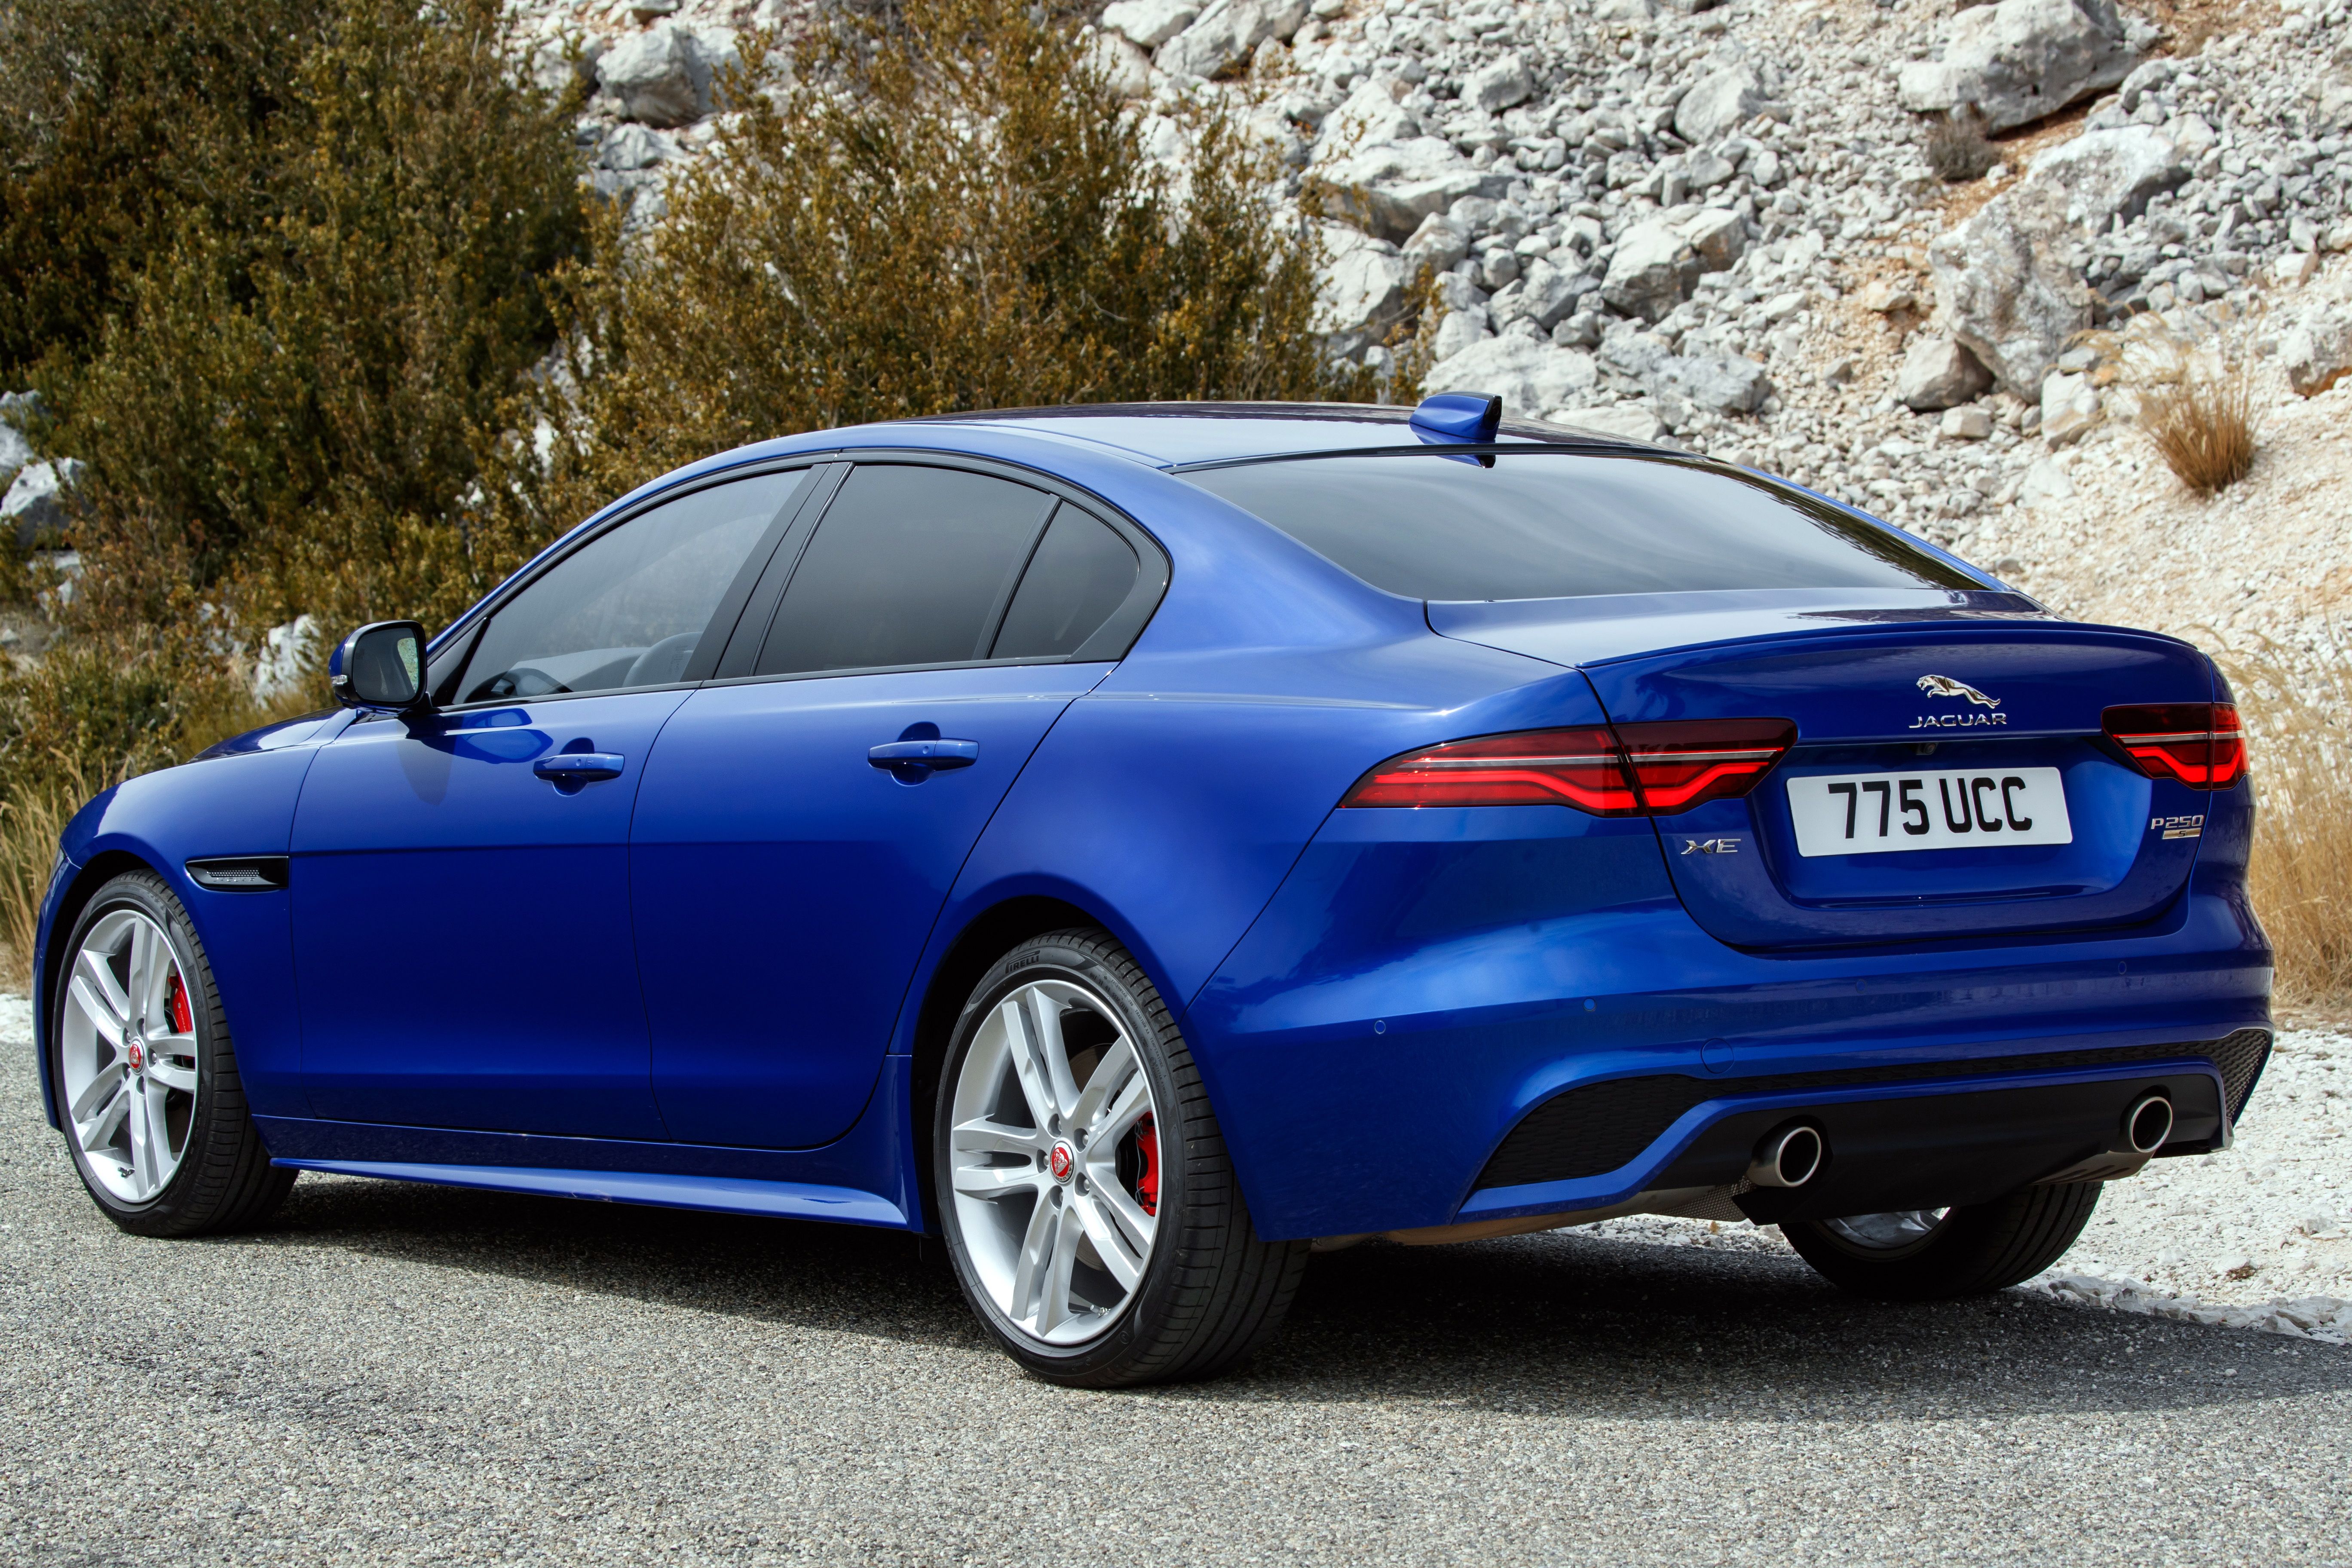 2020 Jaguar XE P300 R-Dynamic S Review: 4 Things You Need To Know